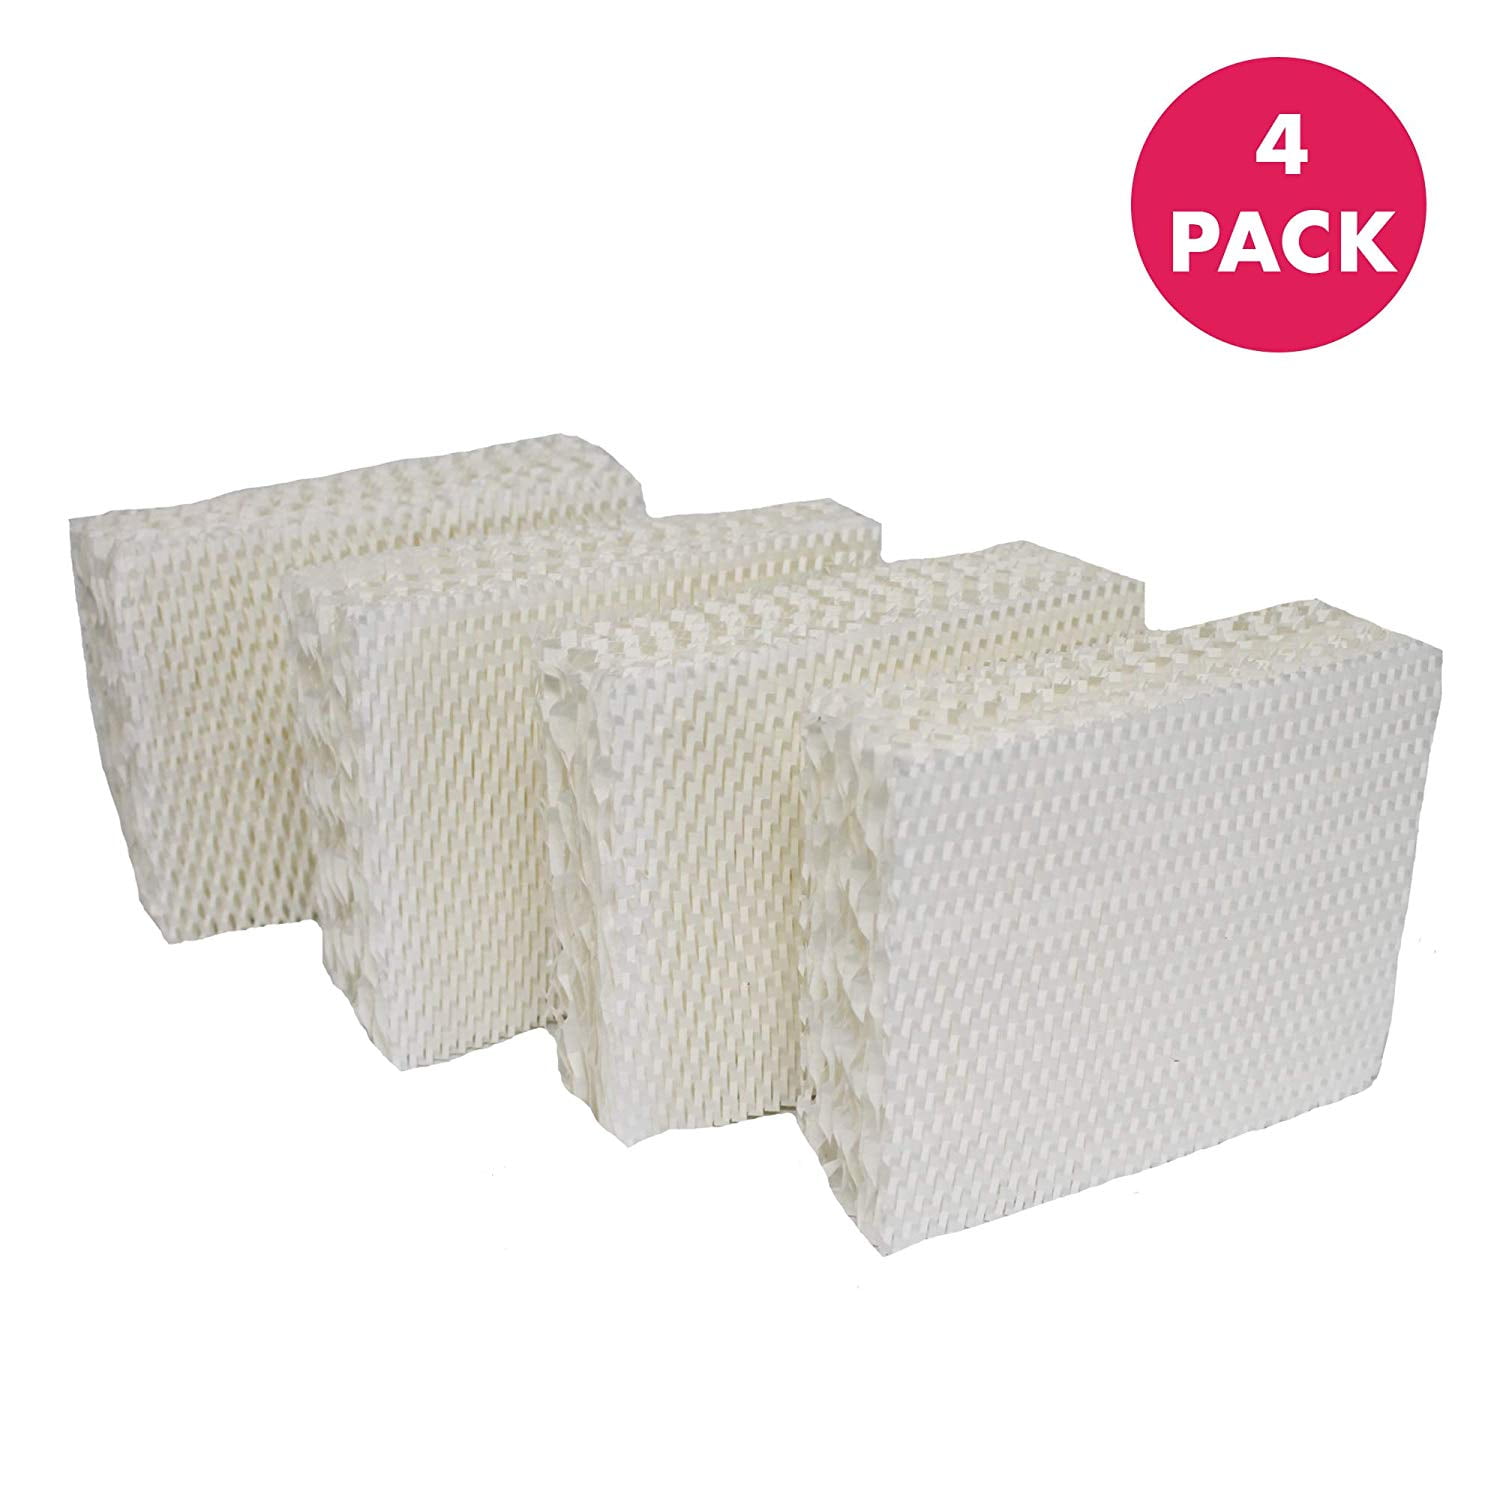 6 Pack Humidifier Filter Replacement for D18 D18-C 